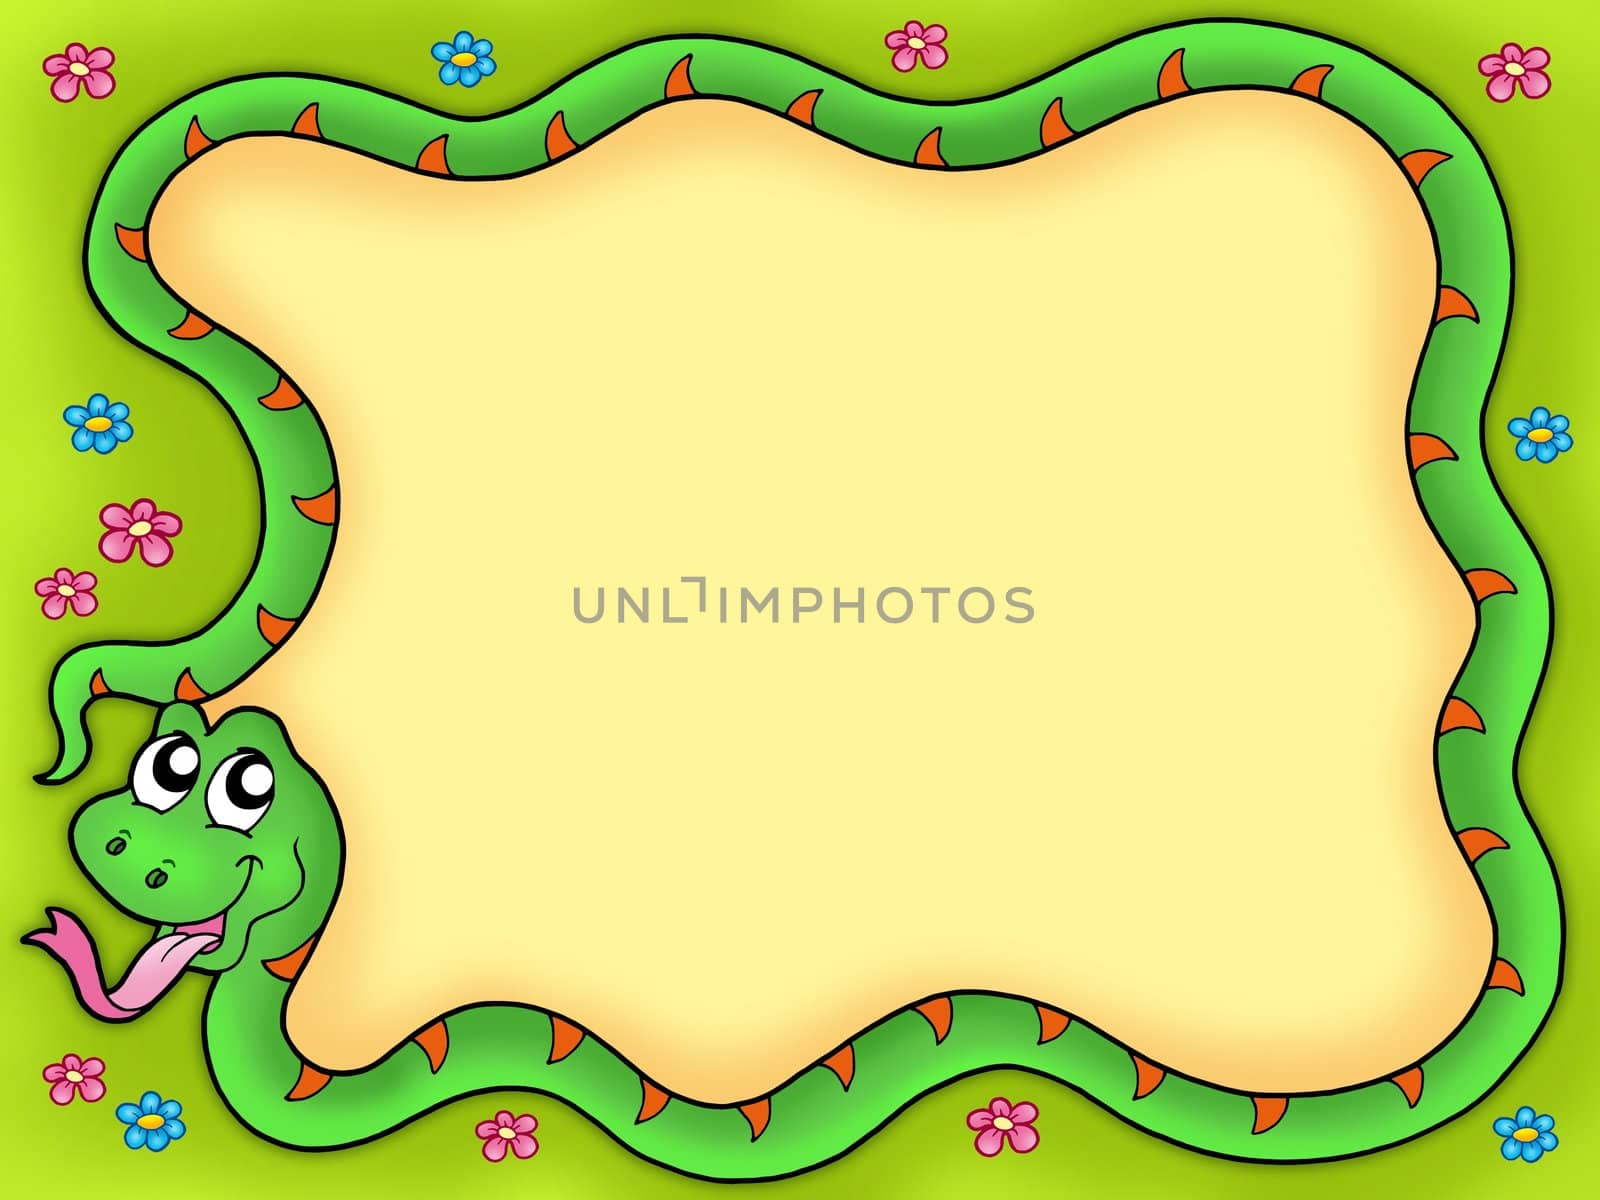 Snake frame with flowers 1 by clairev